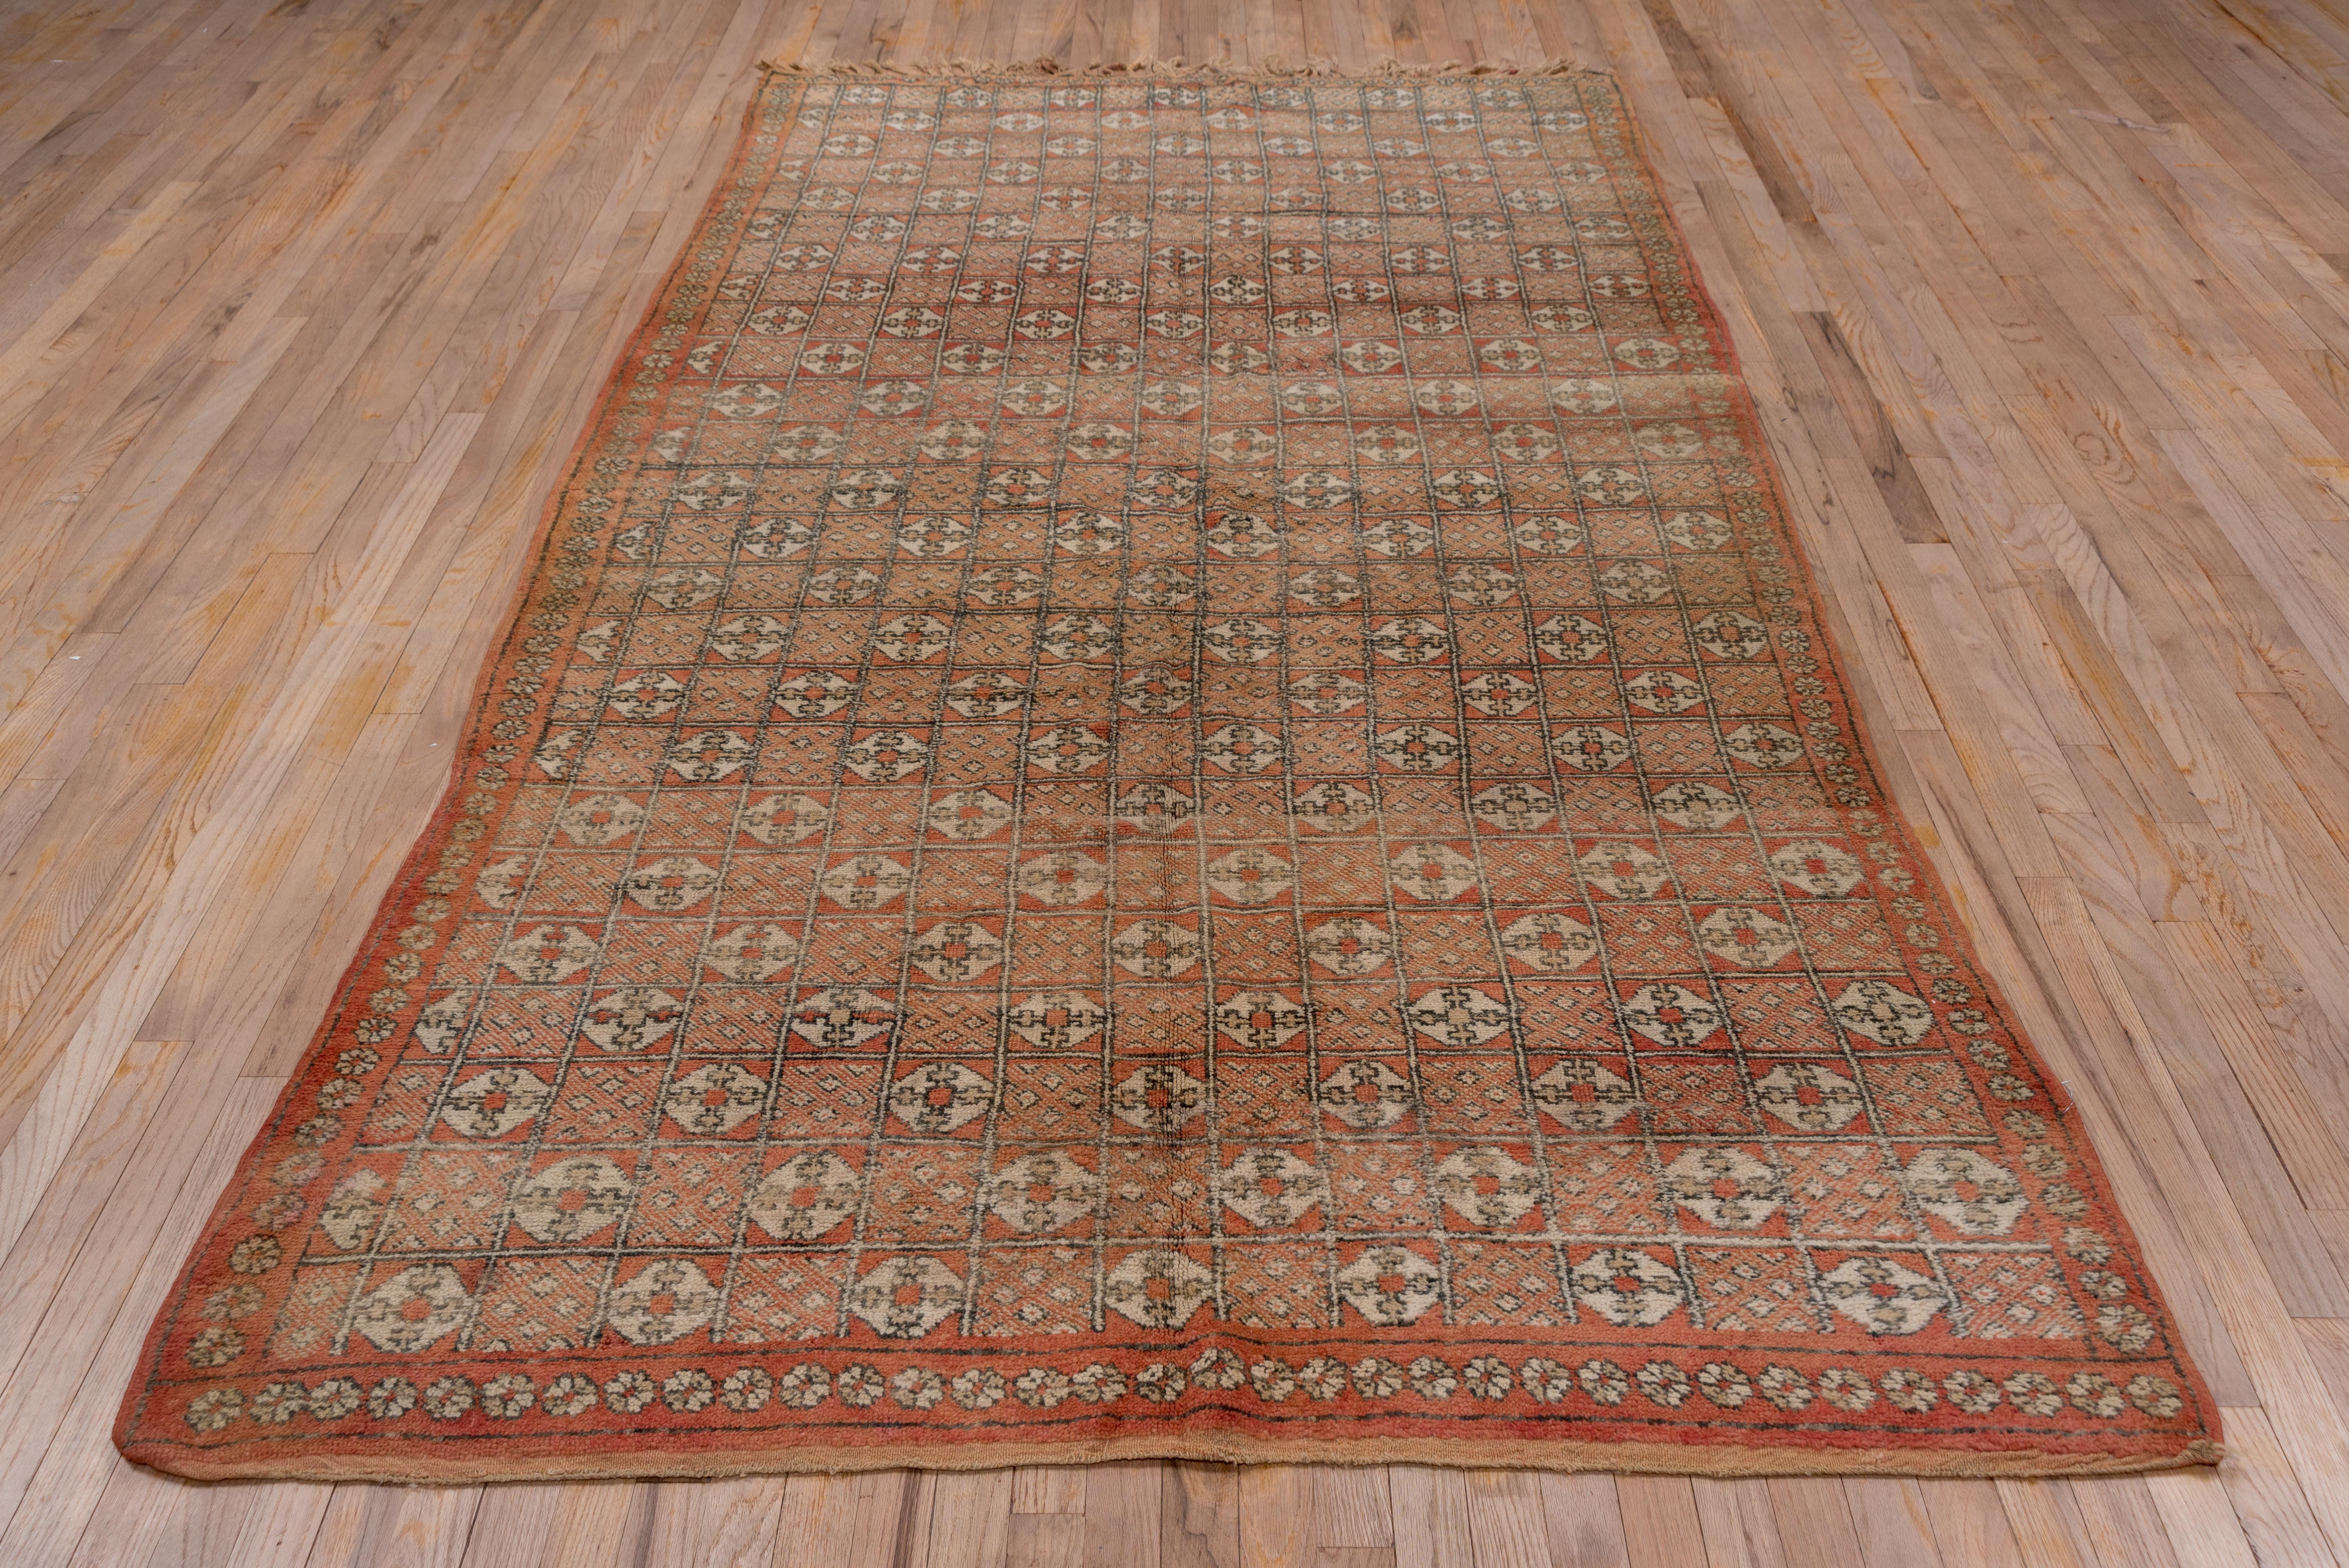 This relatively low pile carpet from the Moroccan plain shows a compact design of rows and columns of squares enclosing two styles of octagons, with a palette in rusty medium and dark brown and beige. The rusty-brown narrow border shows simple